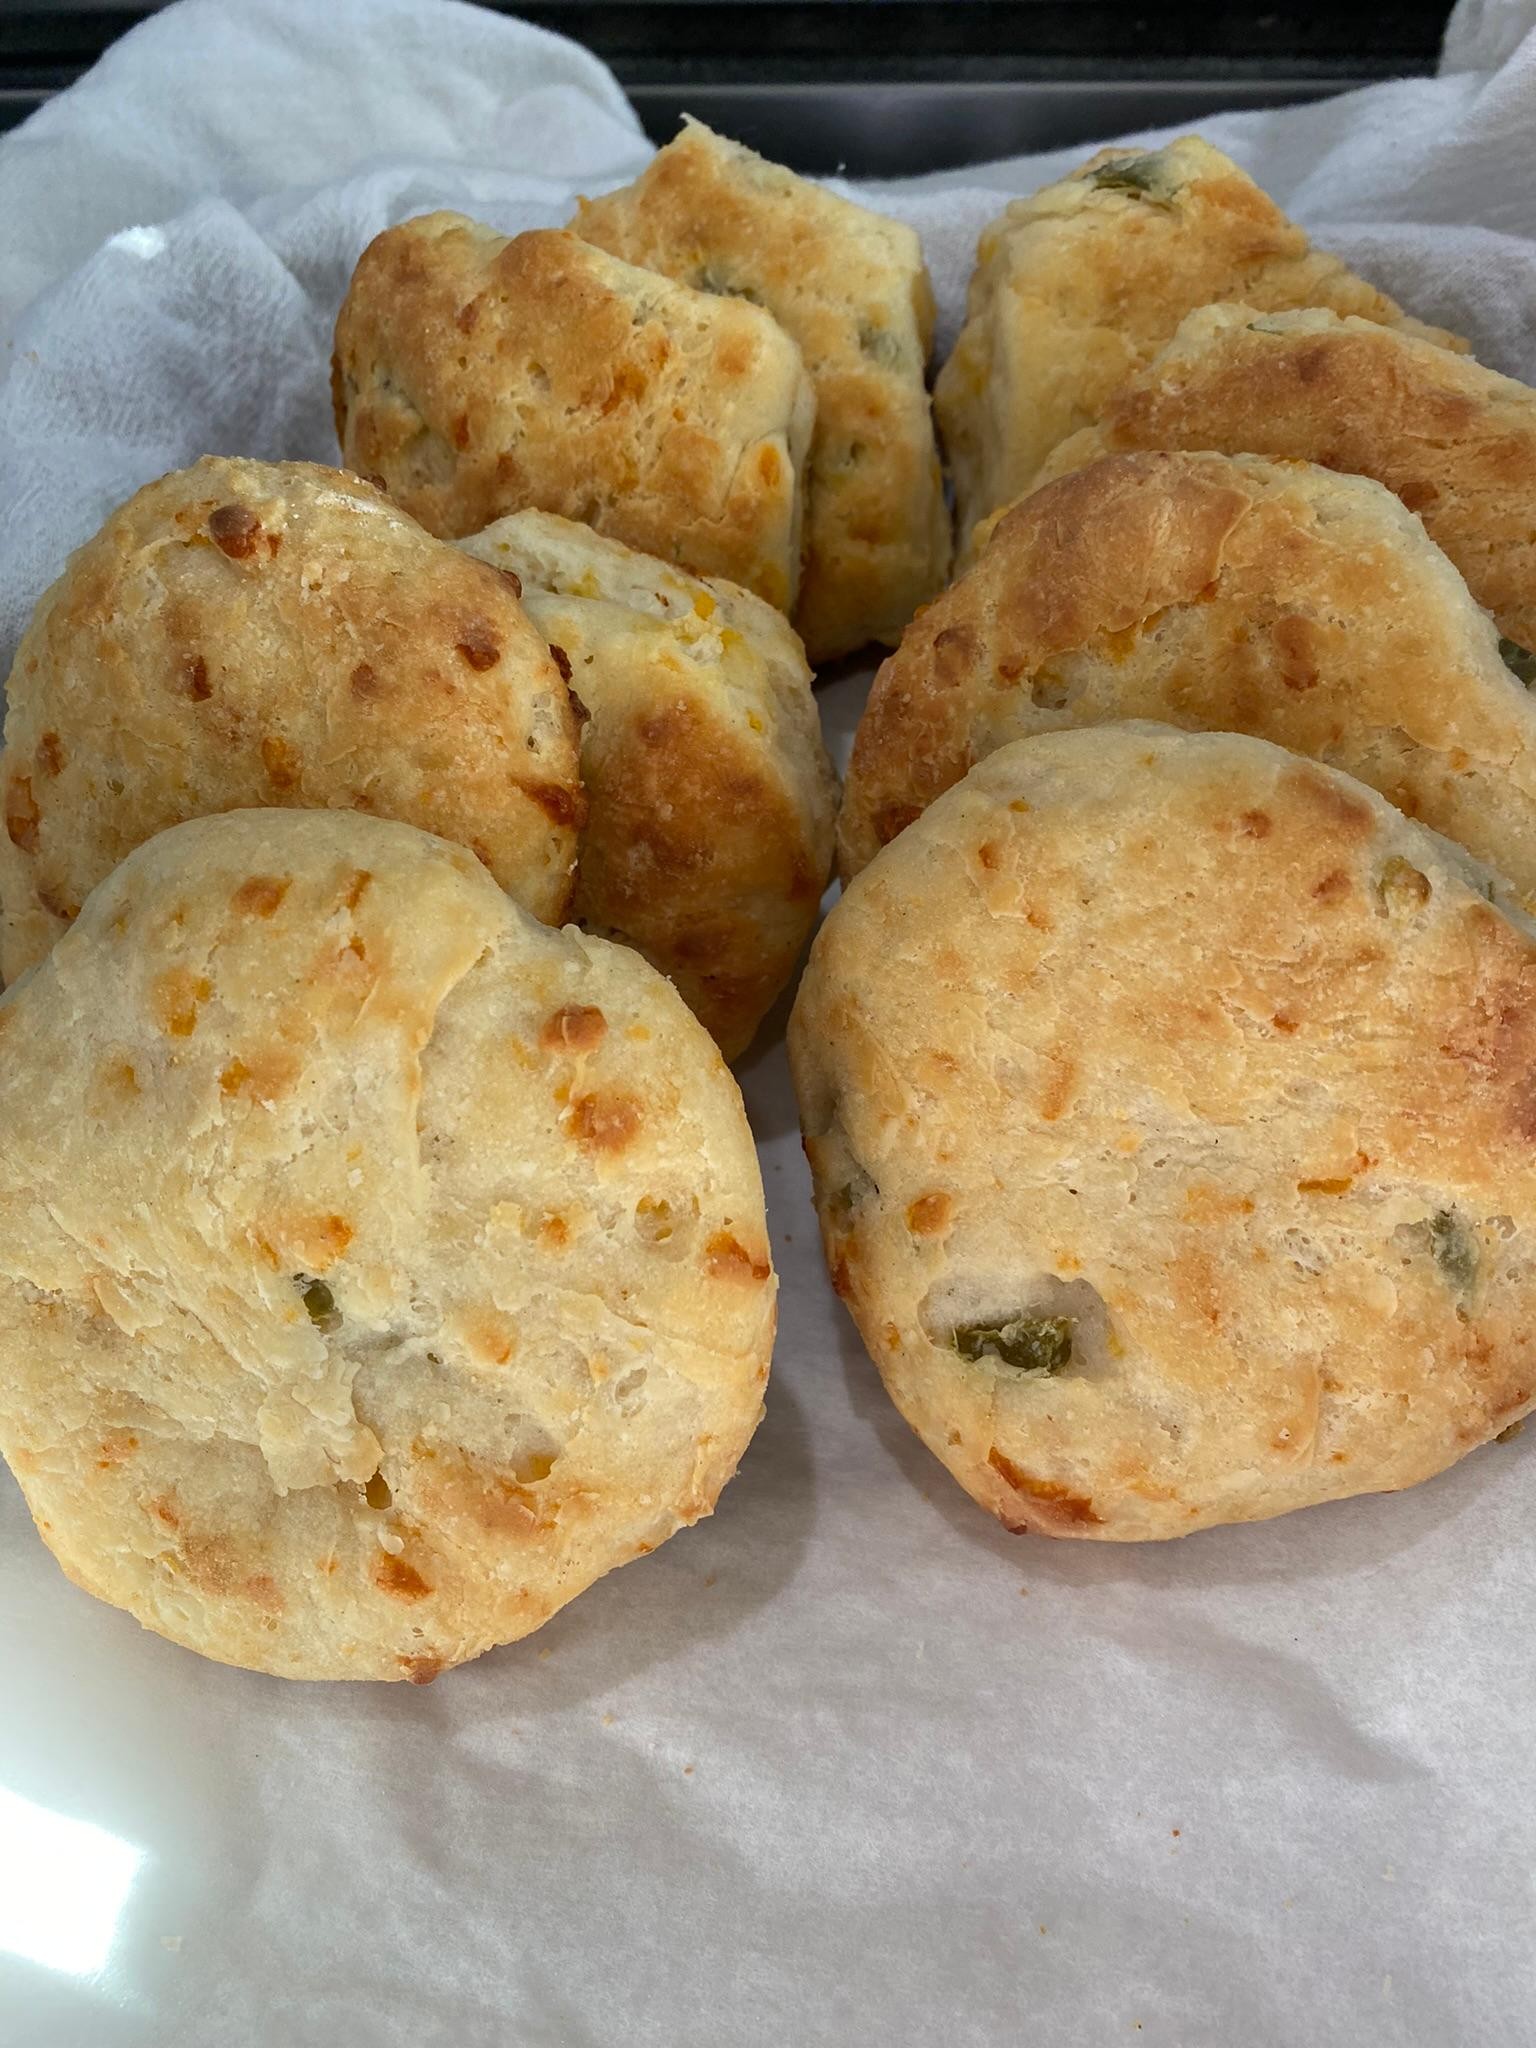 Buttermilk biscuits Jalapeno Cheddar Bakers doz